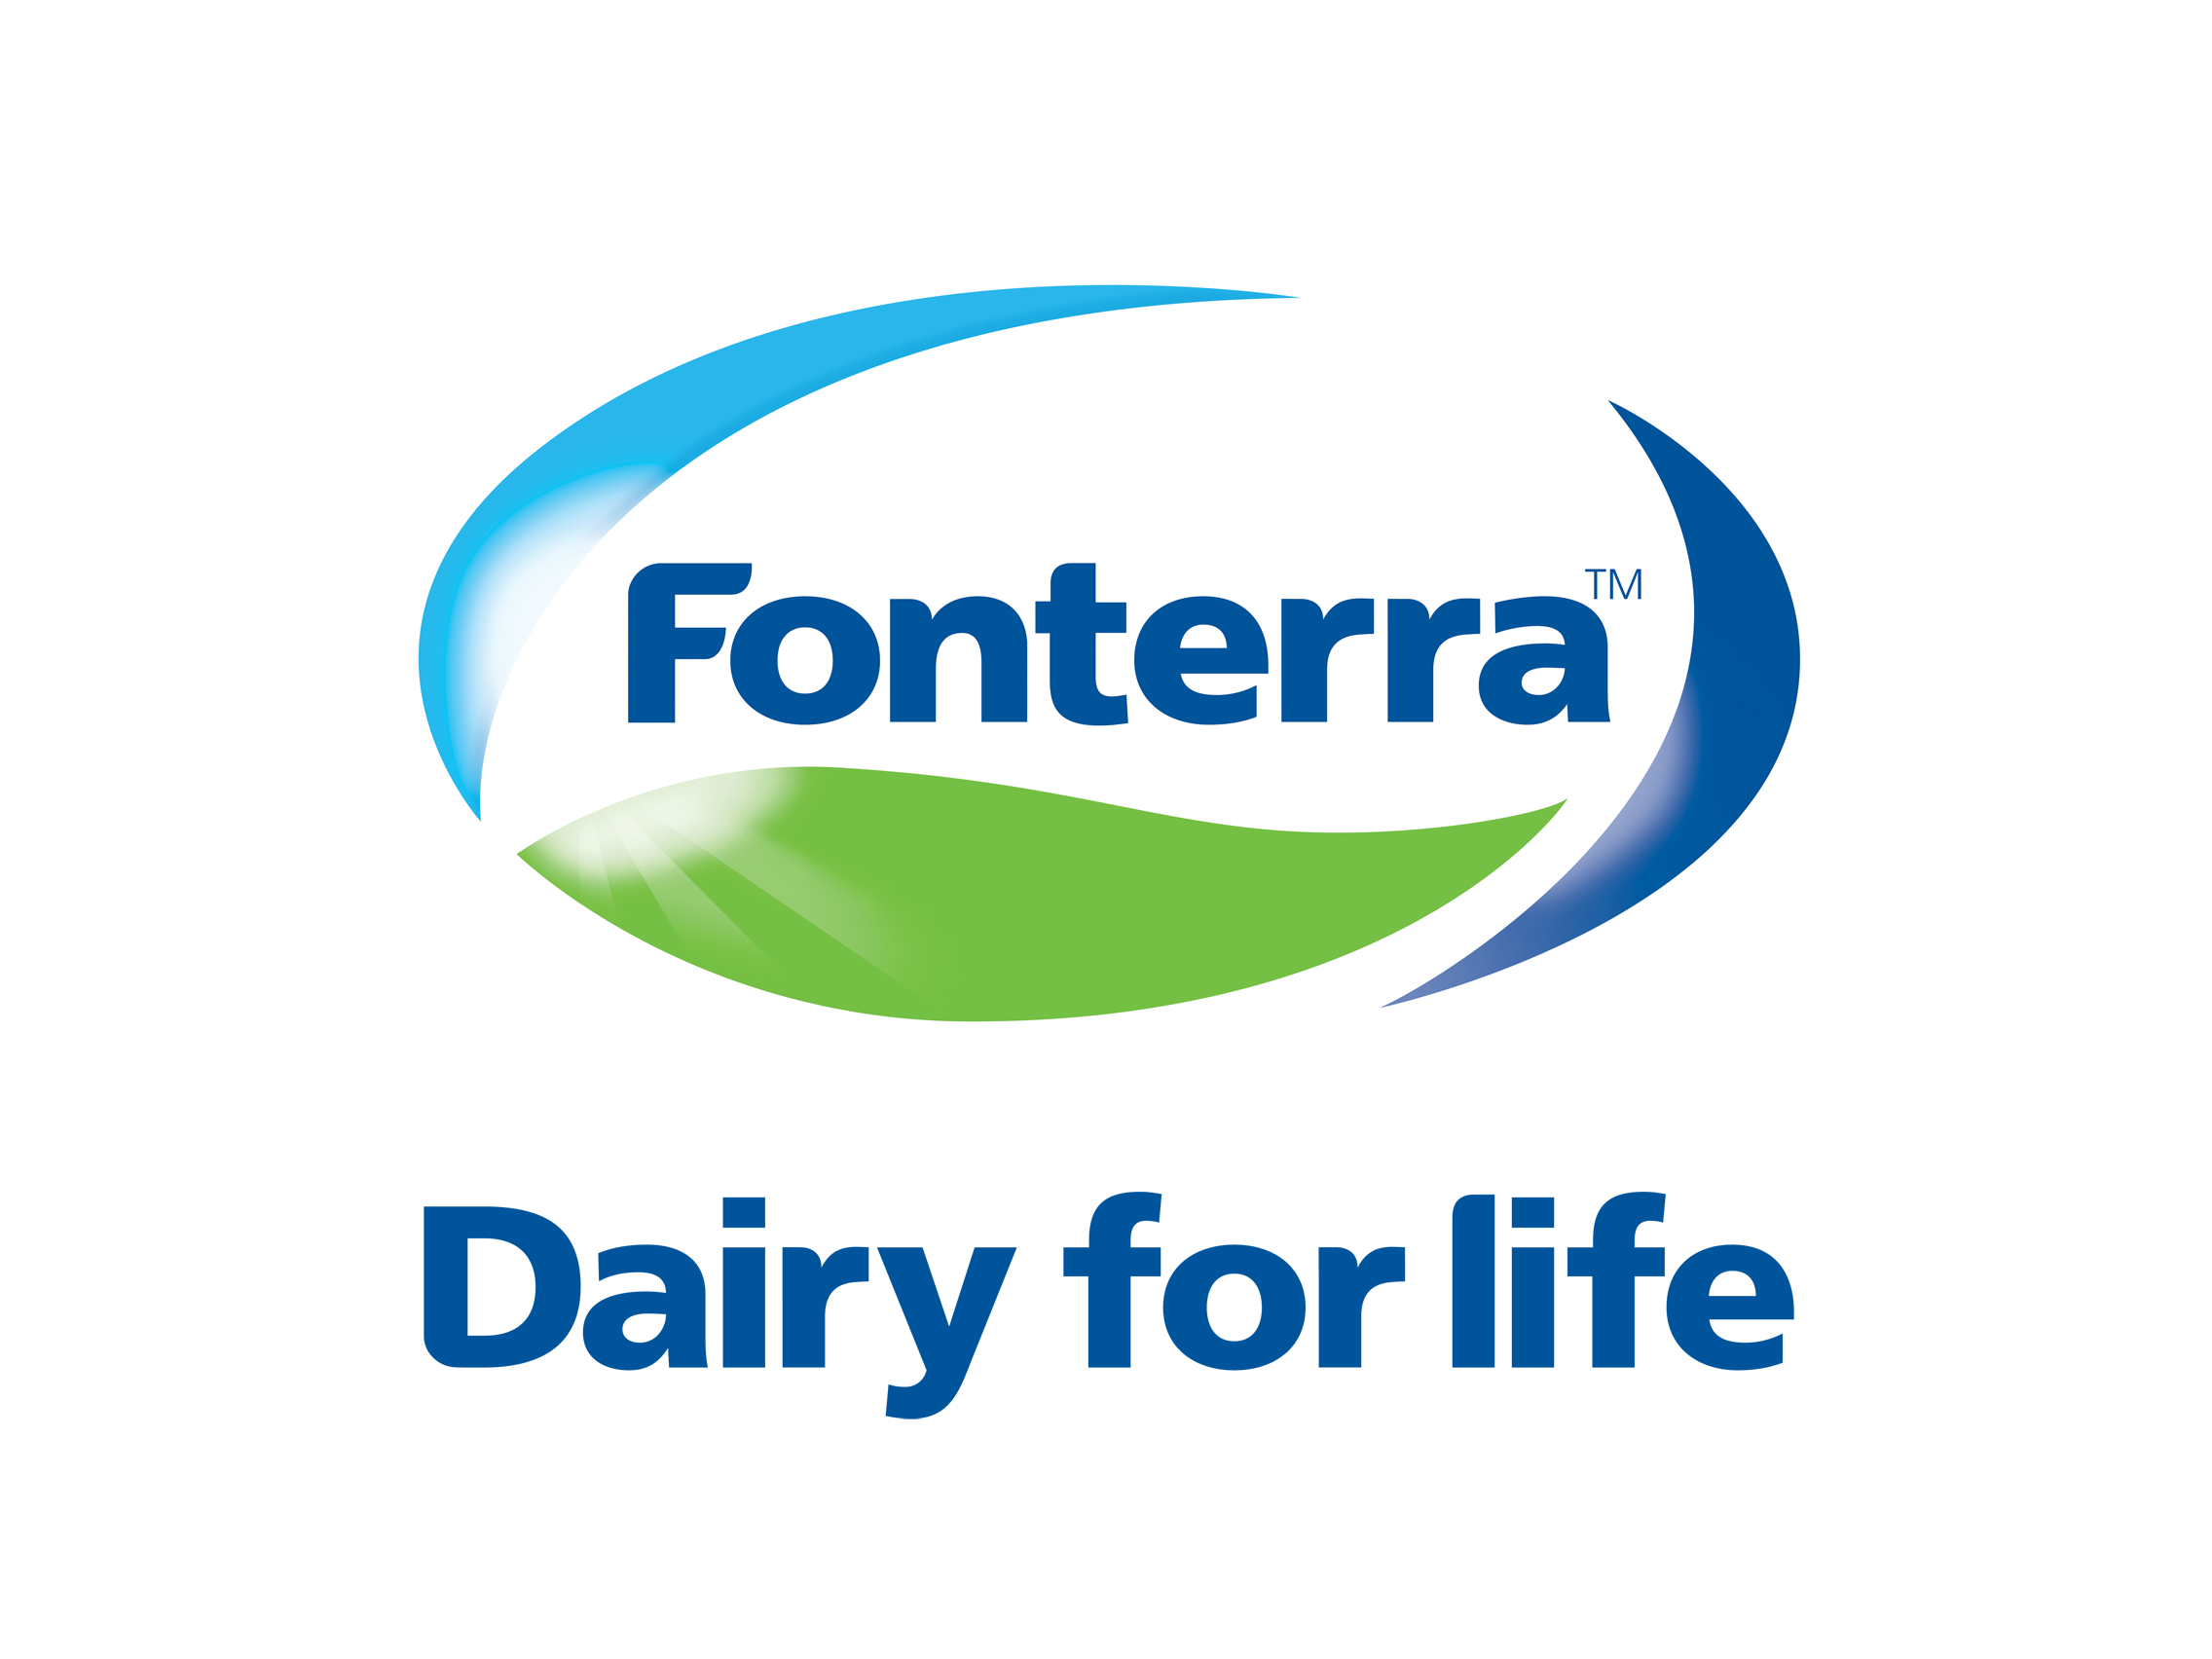 Fonterra logo - Logo Fonterra PNG, Fonterra PNG - Free PNG